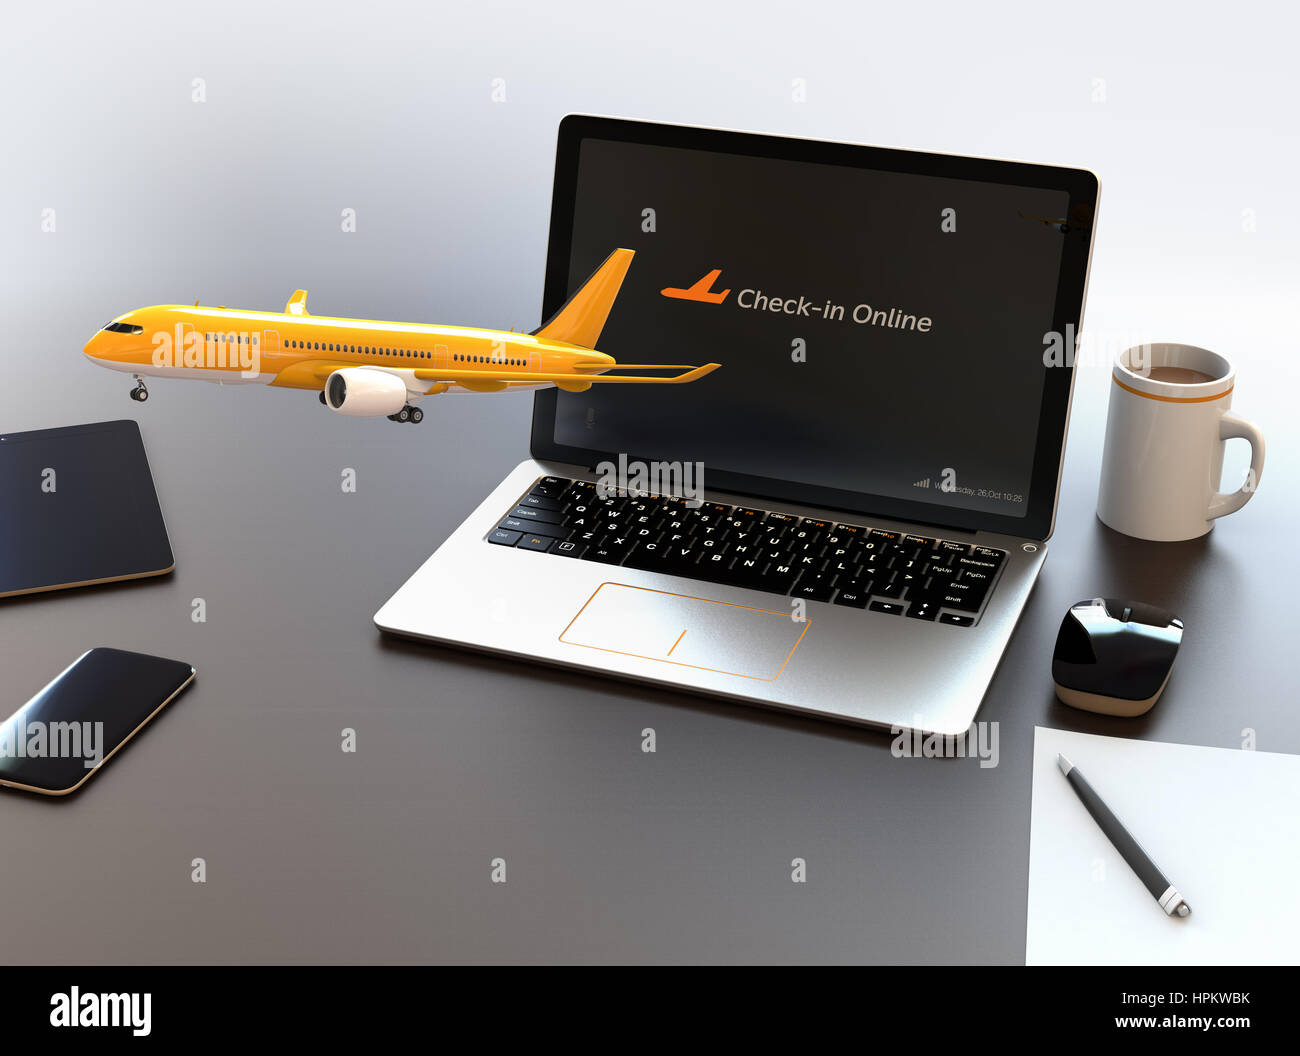 Passenger plane taking off from laptop computer. Online flight check in concept. 3D rendering image. Stock Photo